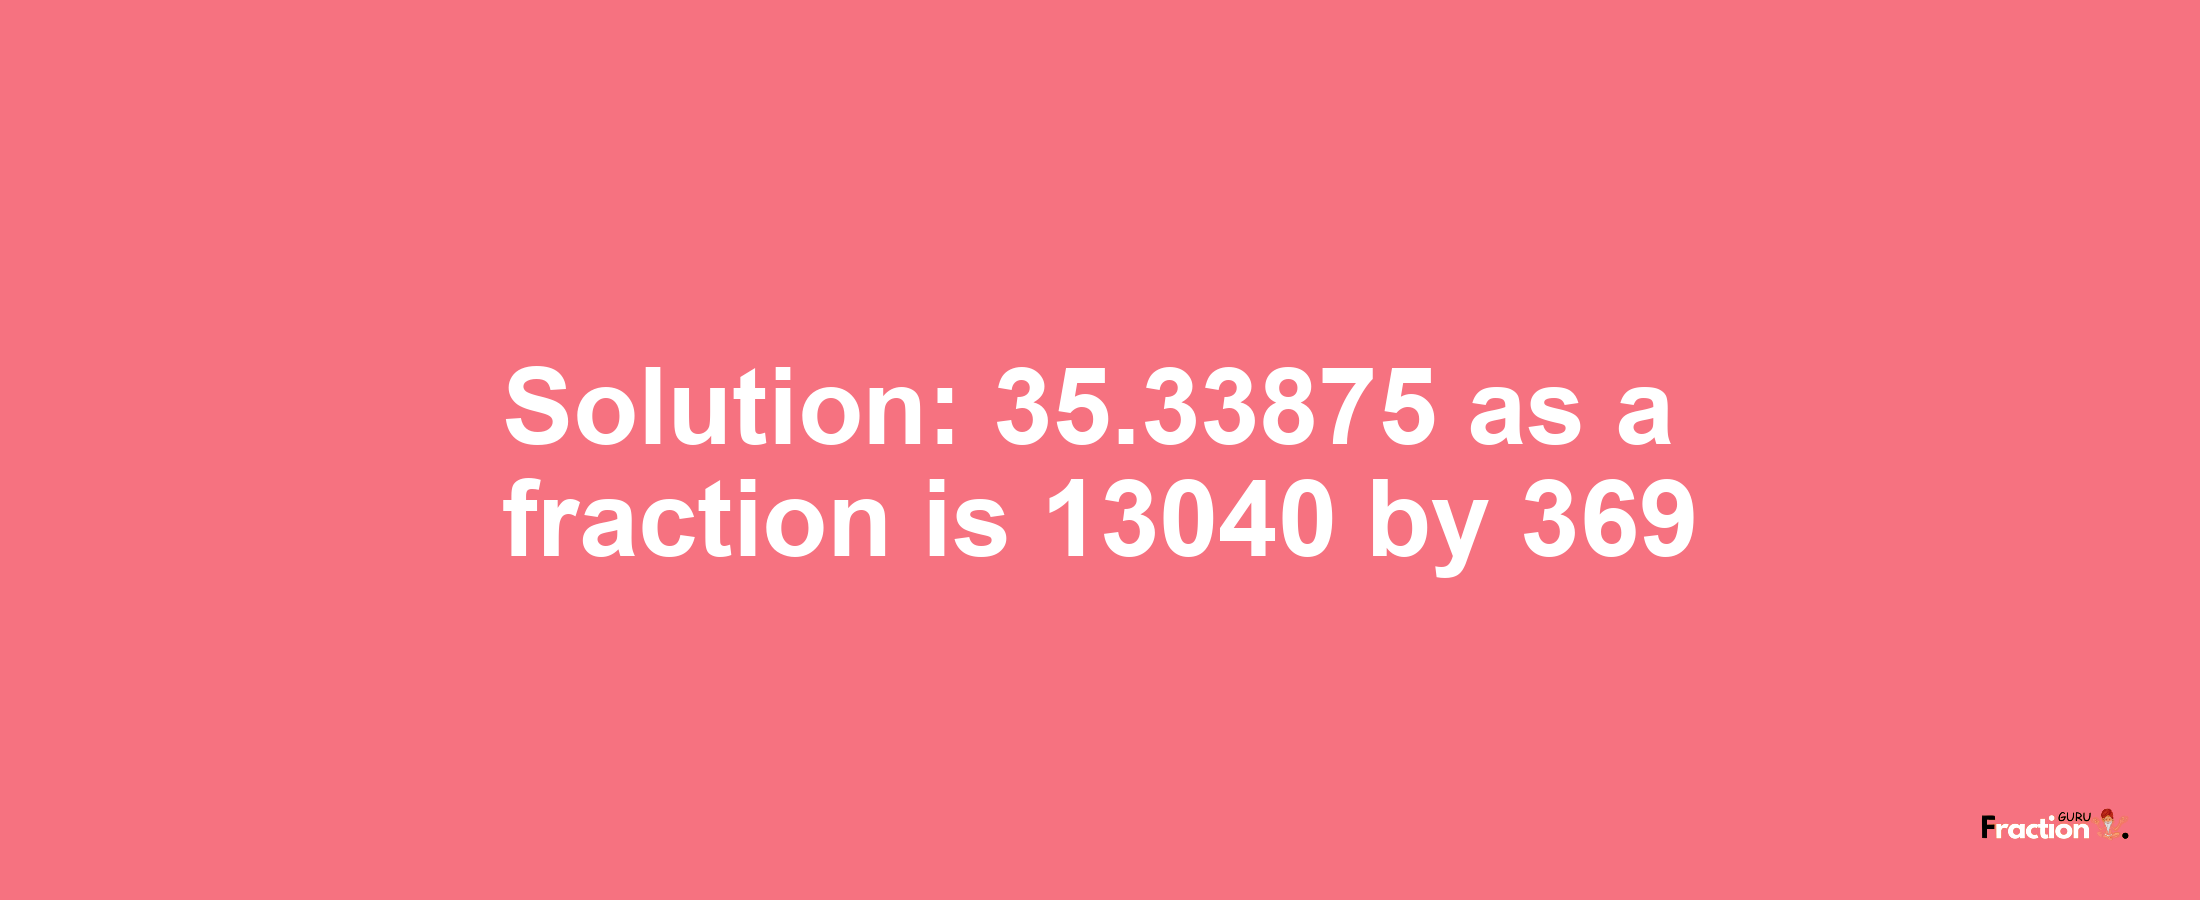 Solution:35.33875 as a fraction is 13040/369